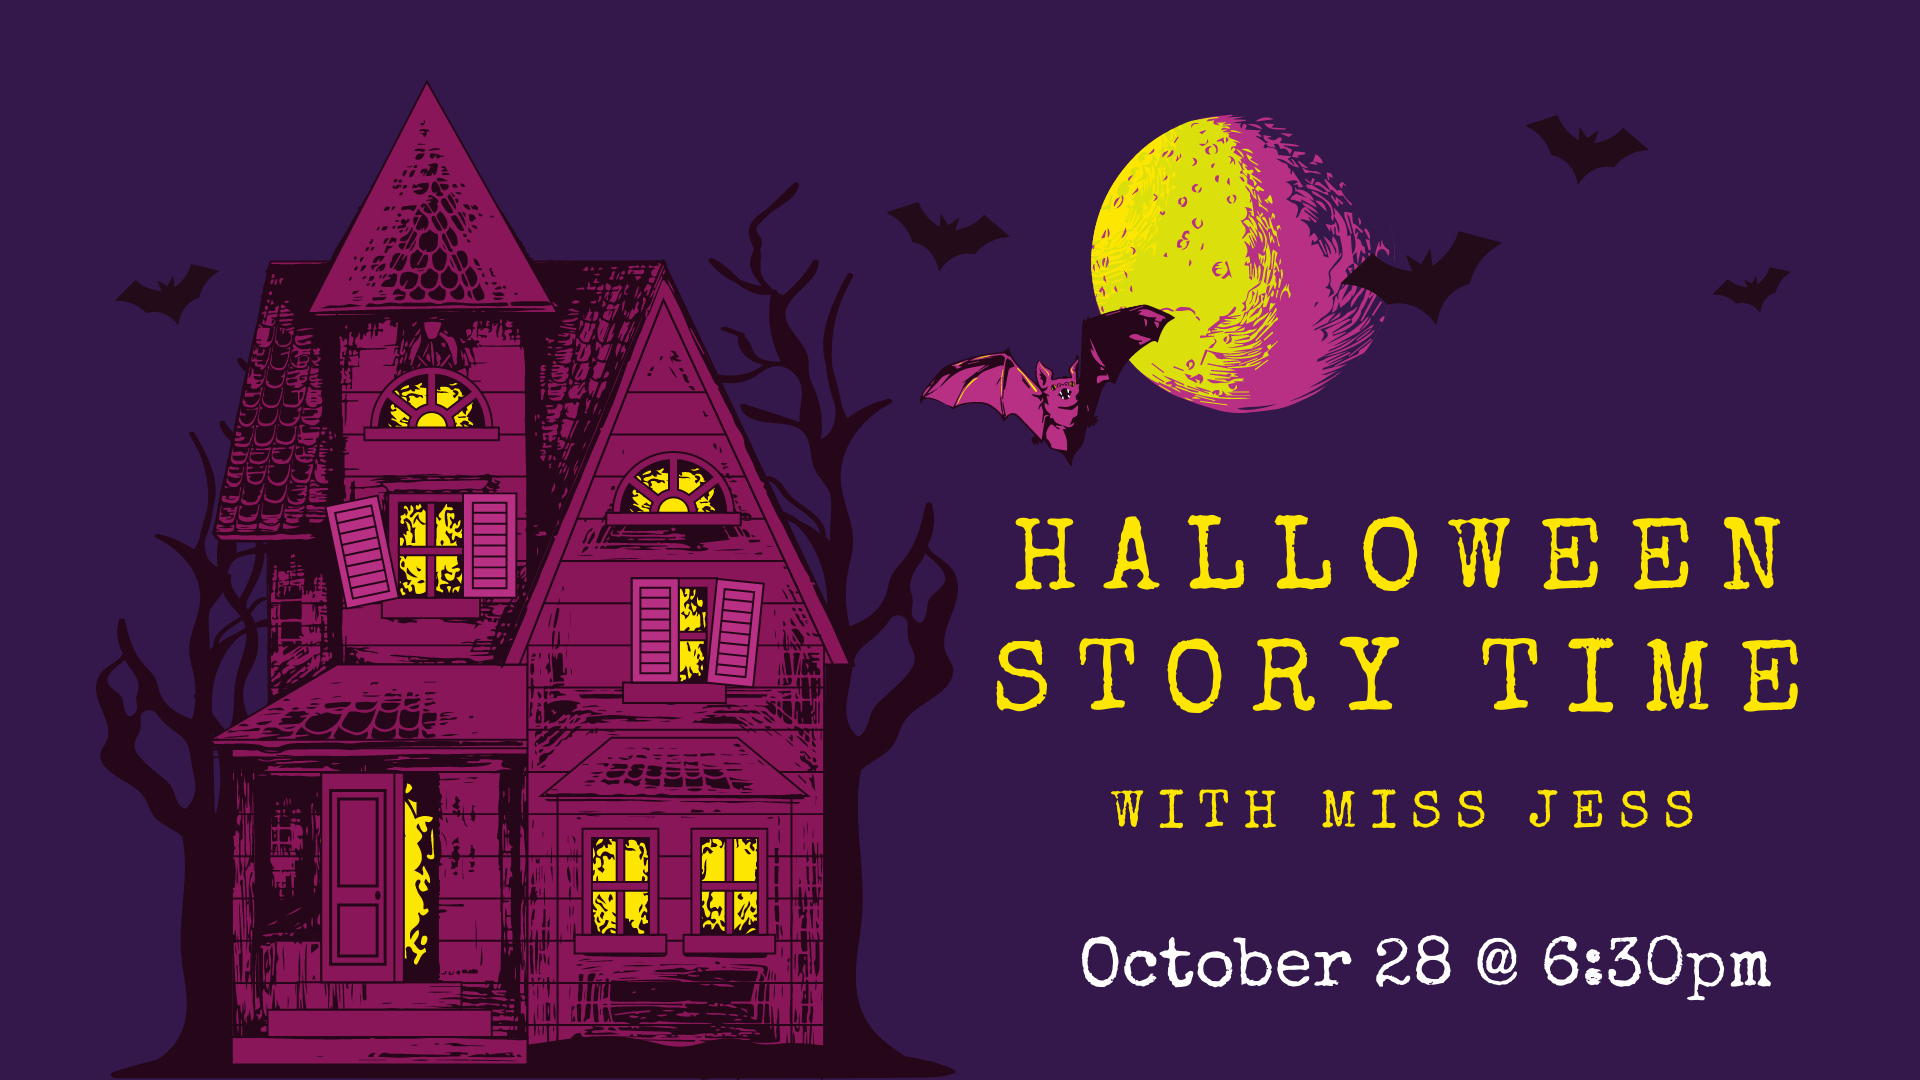 Halloween Story Time with Miss Jess on October 28, 2020 at 6:30pm.